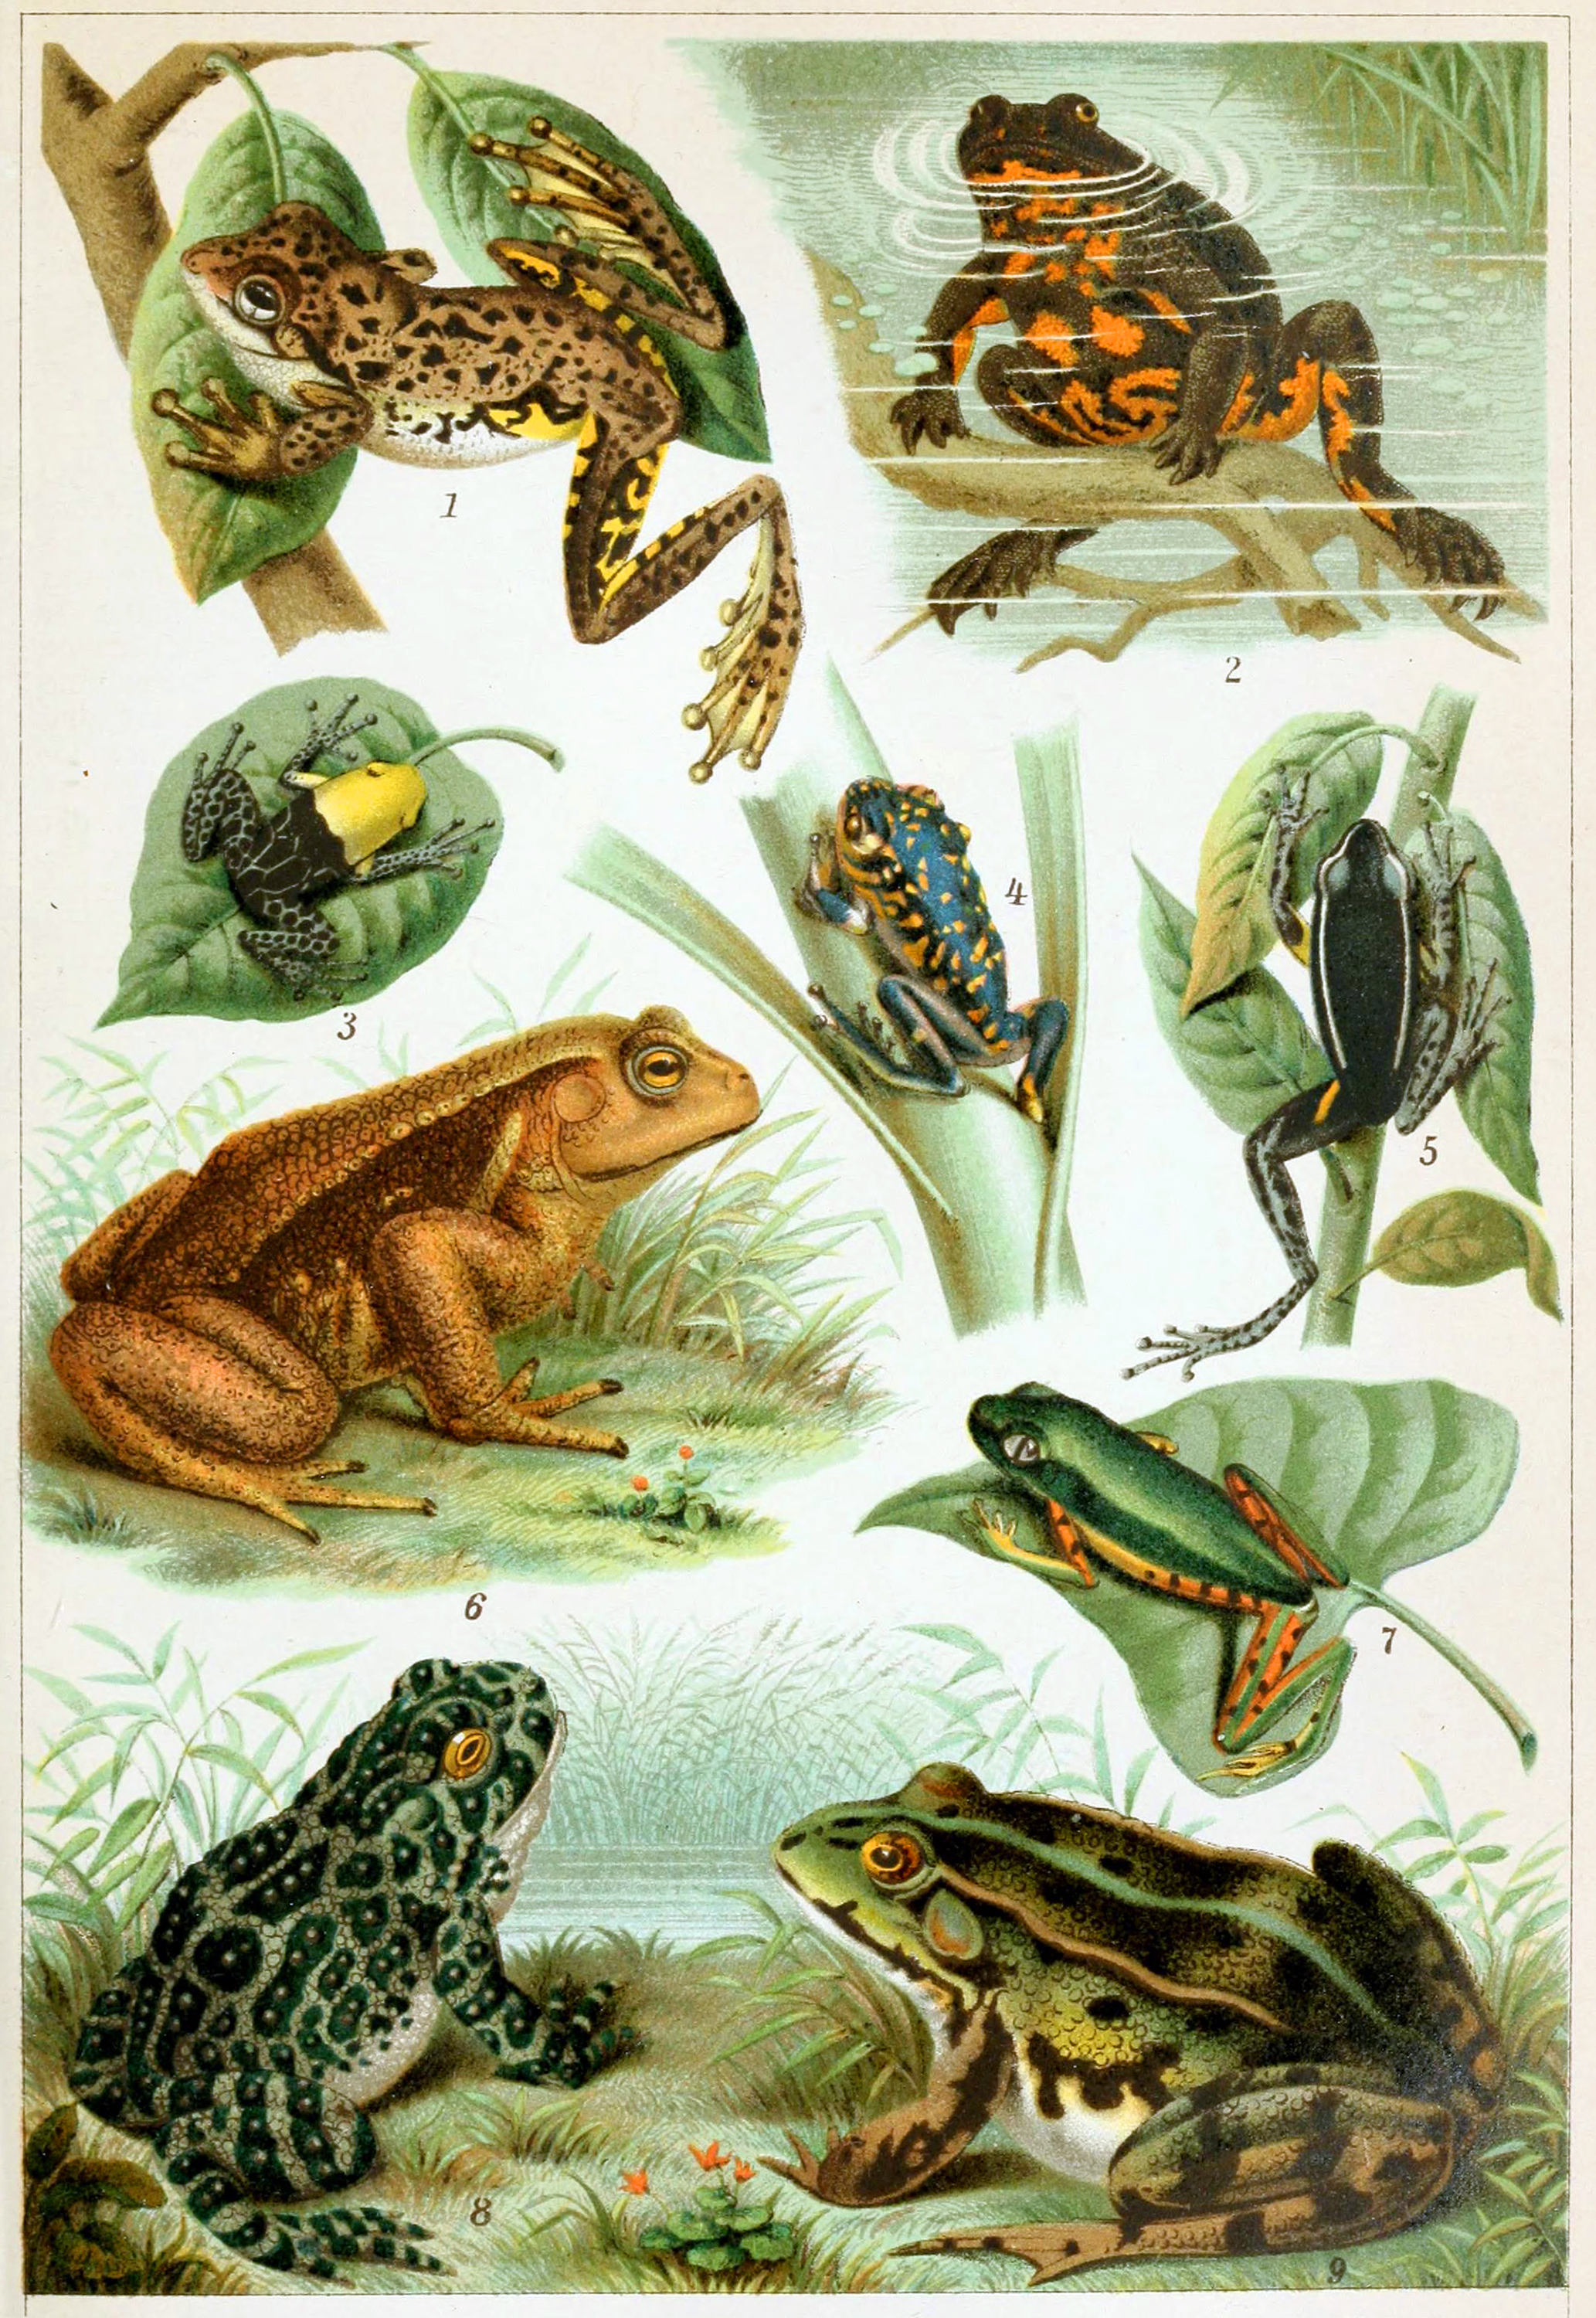 How many families do frogs have?